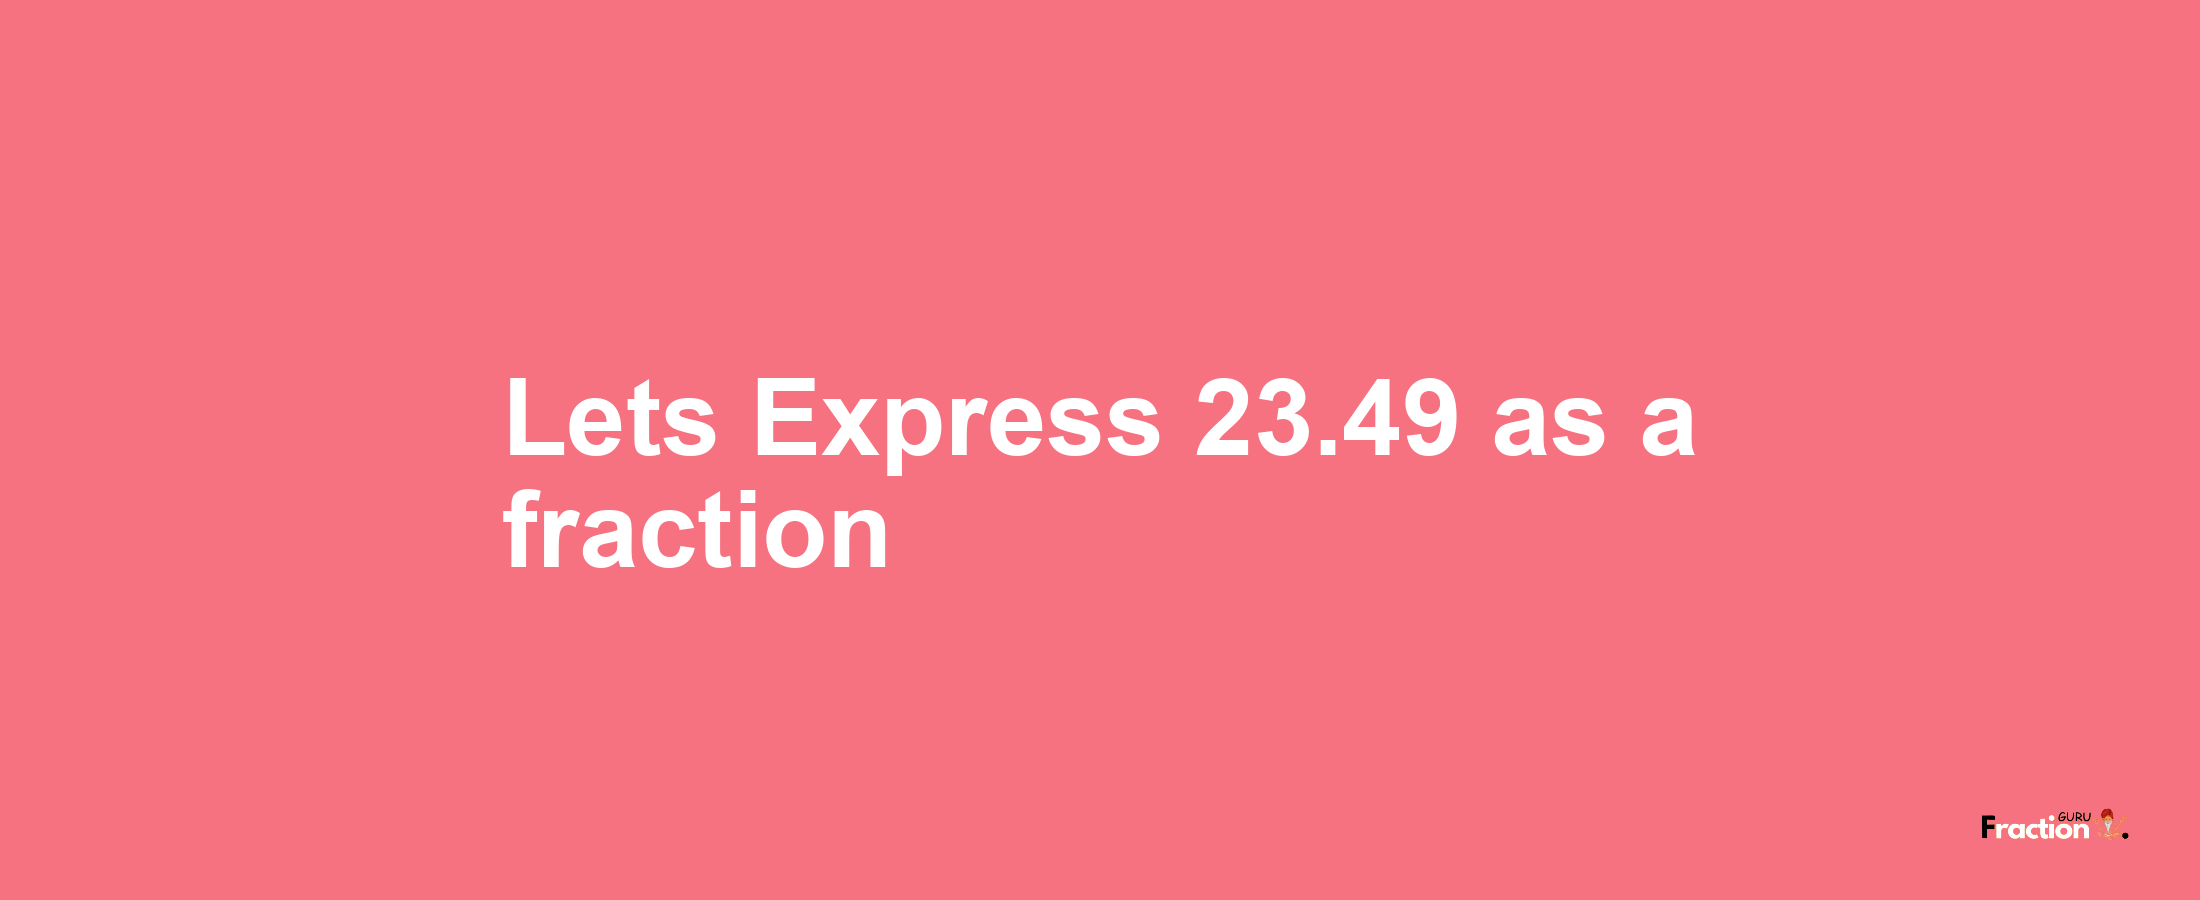 Lets Express 23.49 as afraction